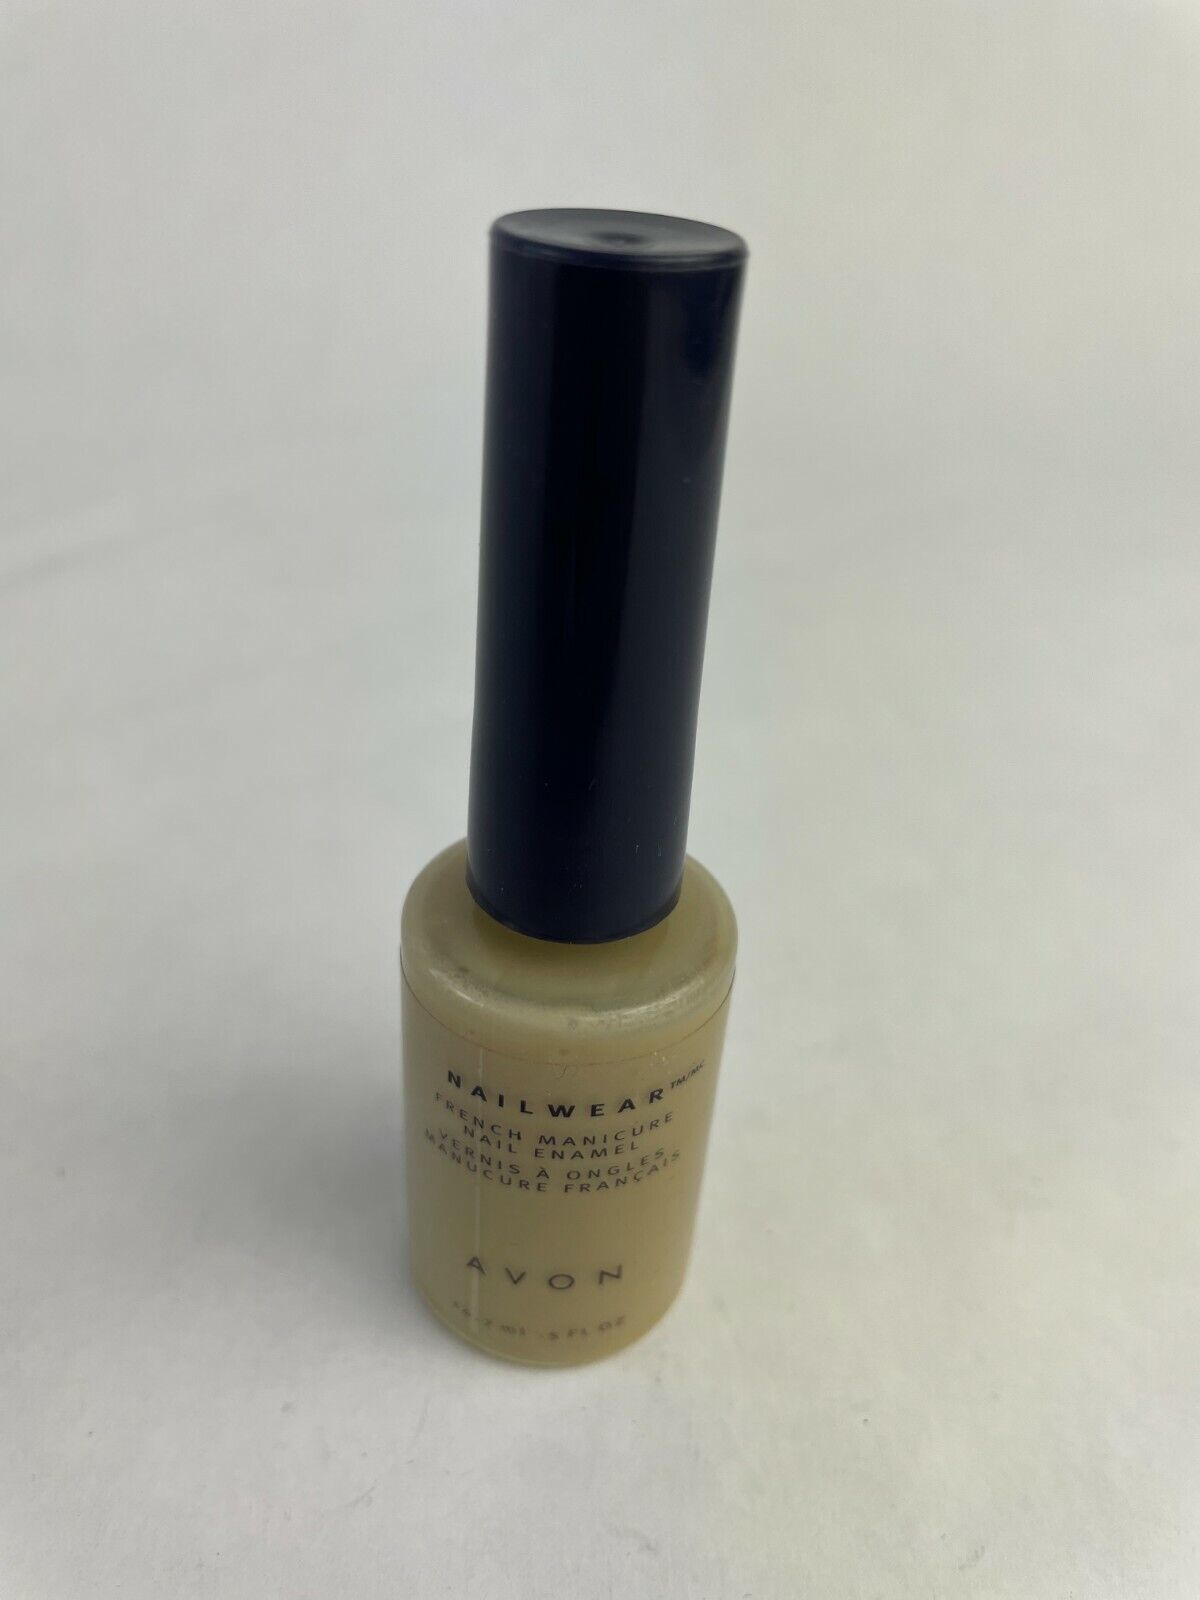 Primary image for Avon Nailwear French Manicure Nail Enamel Vernis A Ongles  Francals 14.7ml Q1